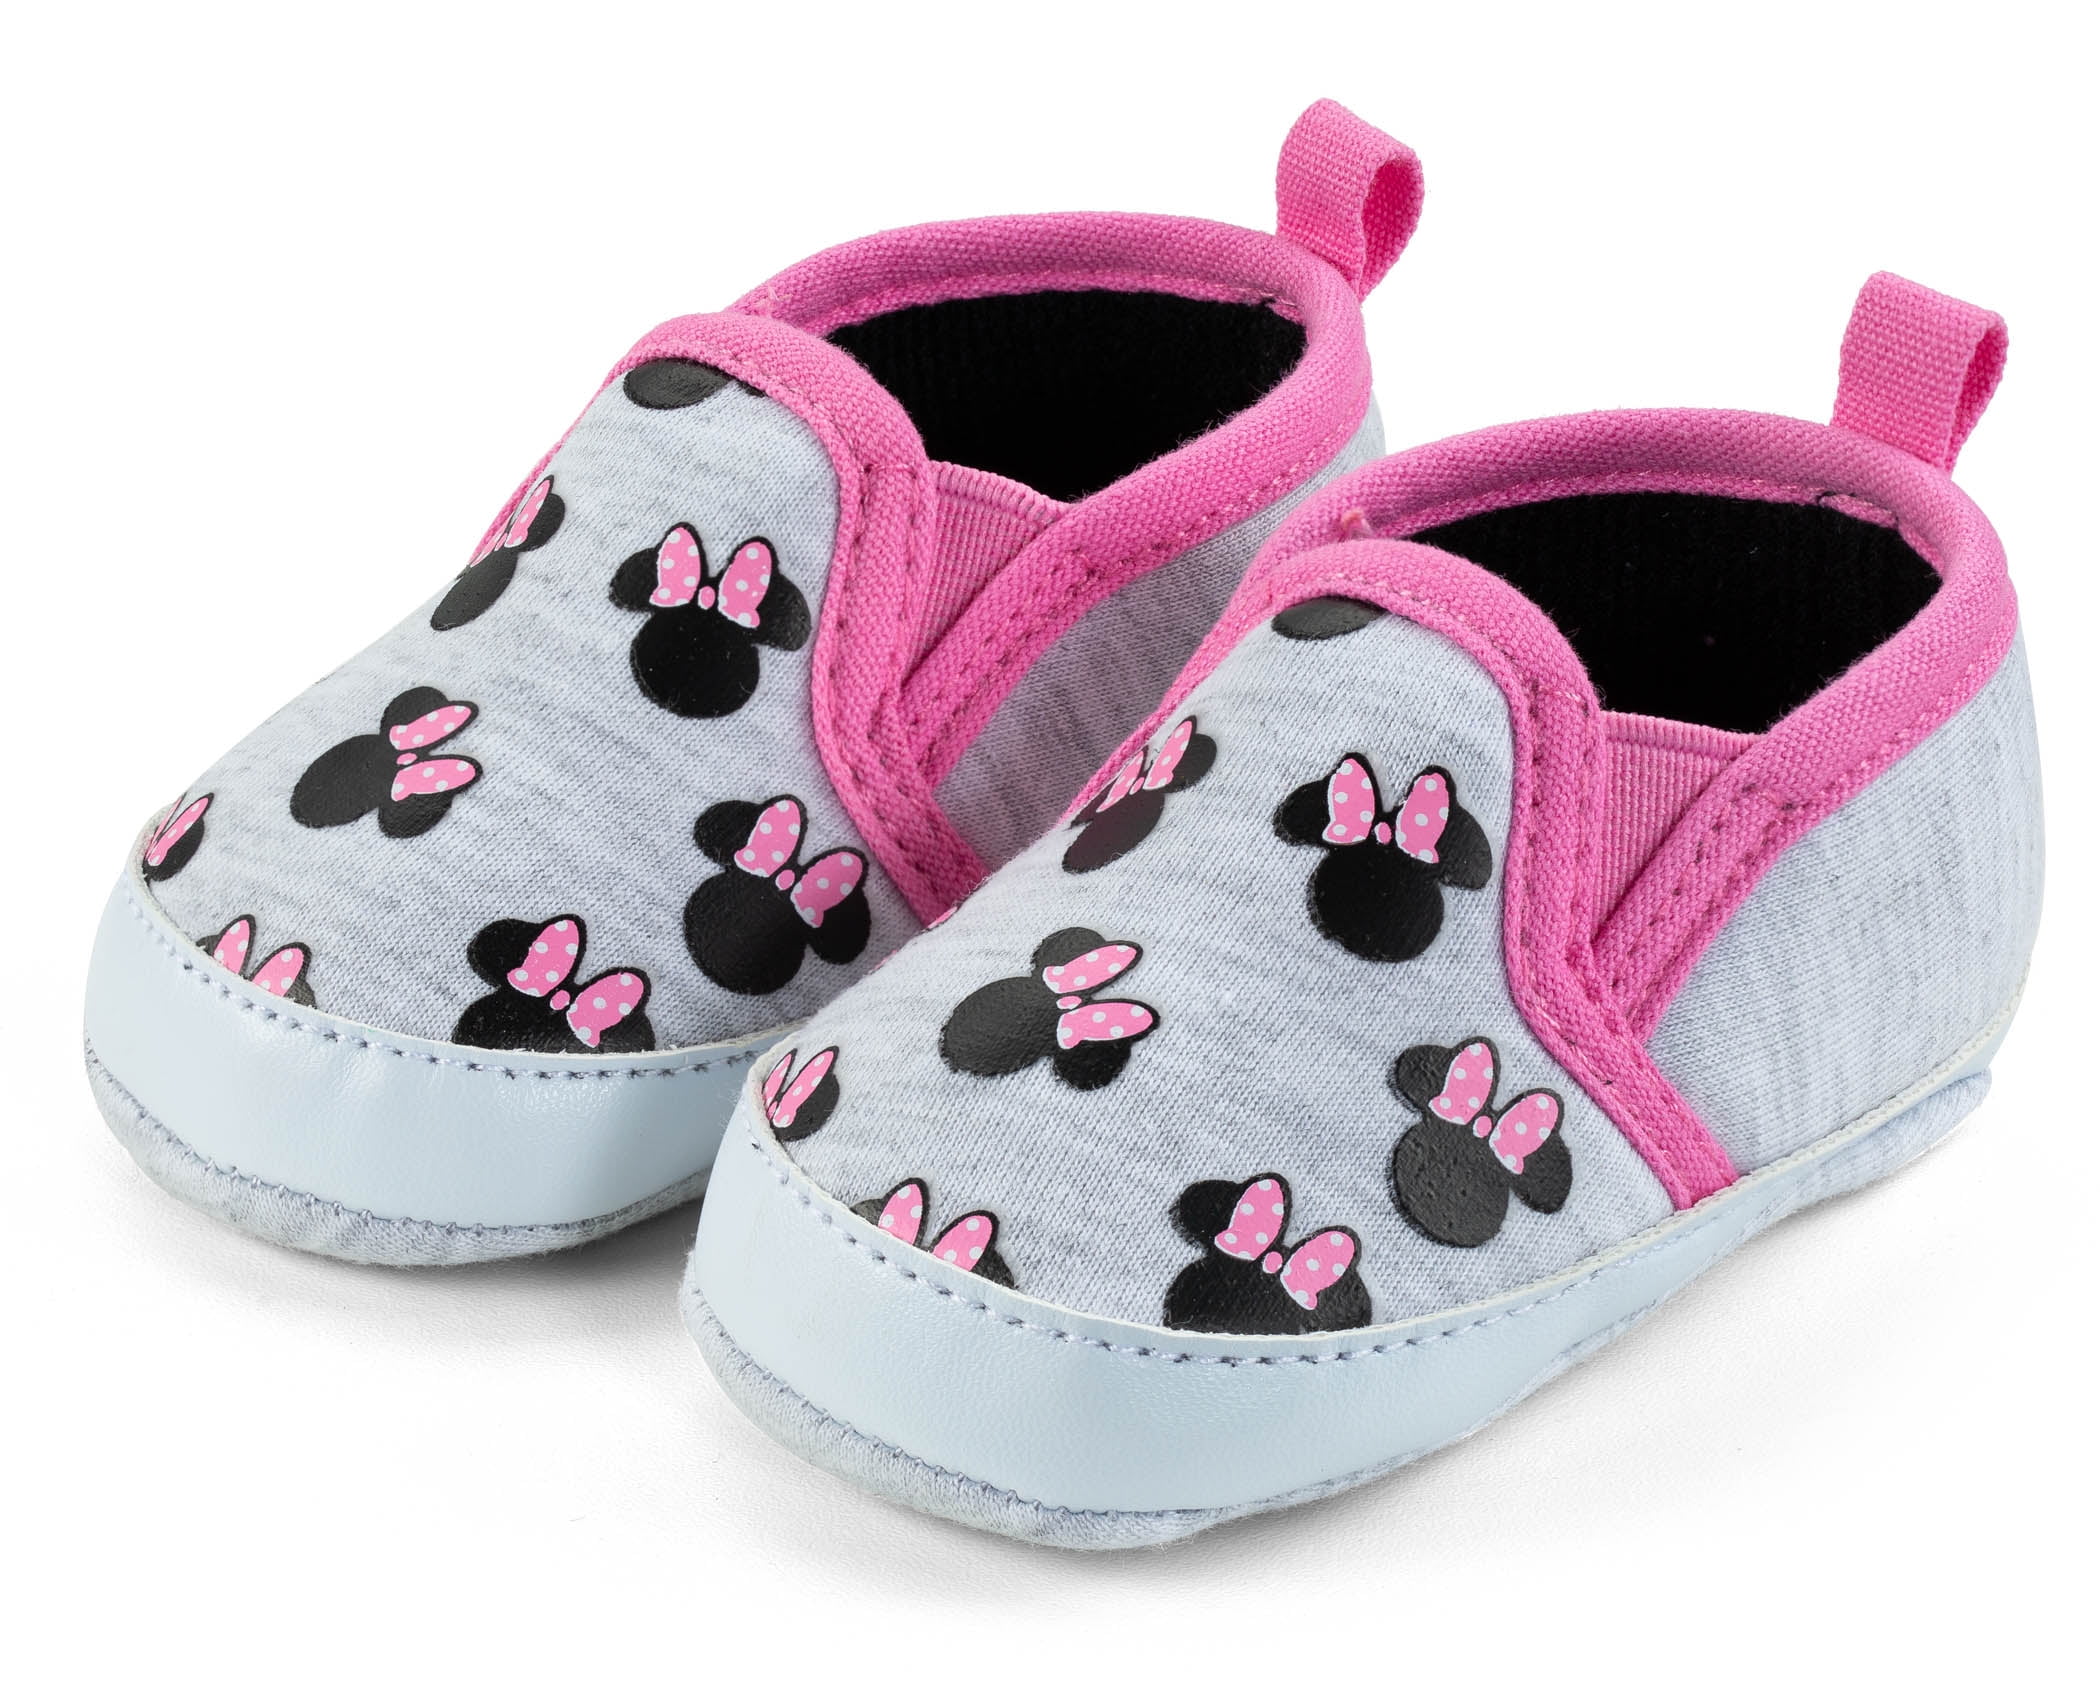 Disney Minnie Mouse Baby Girl Crib Shoes Size 3-6 Months Glitter Silver 